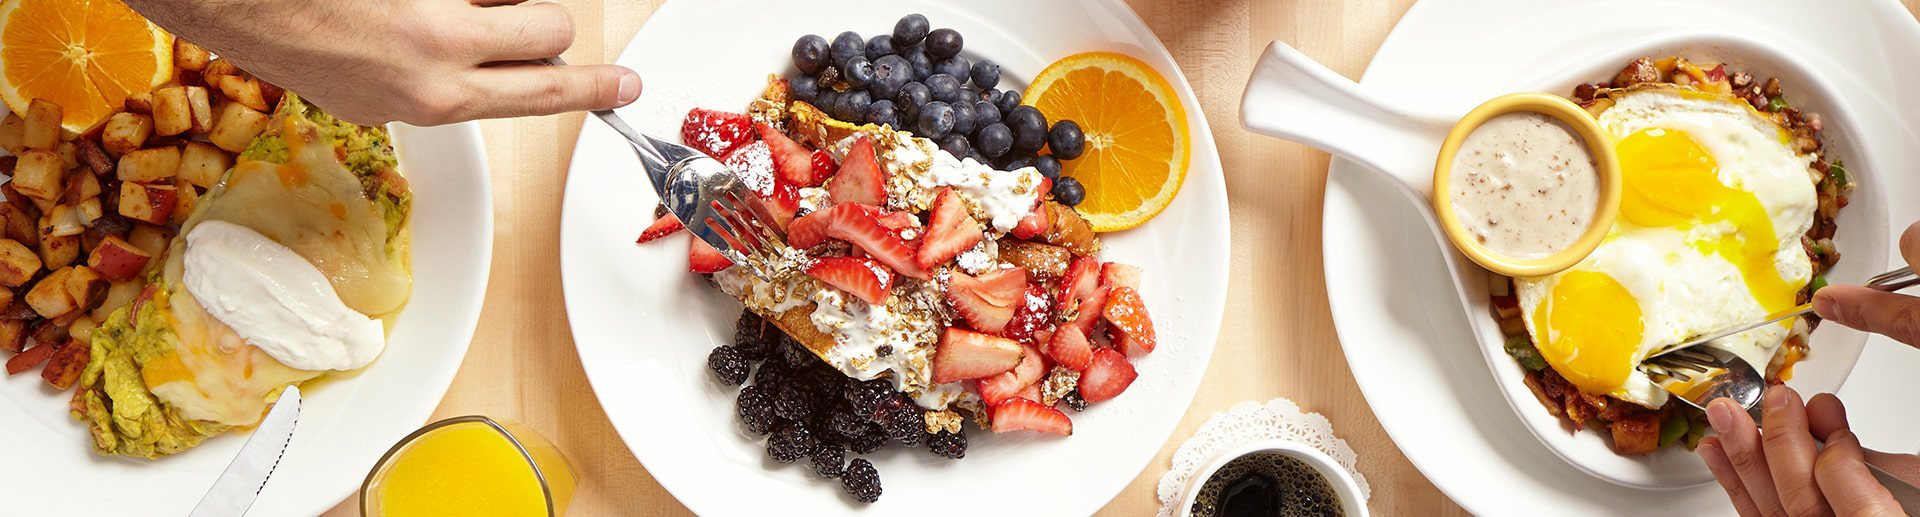 French toast with berries, eggs over easy and omelet